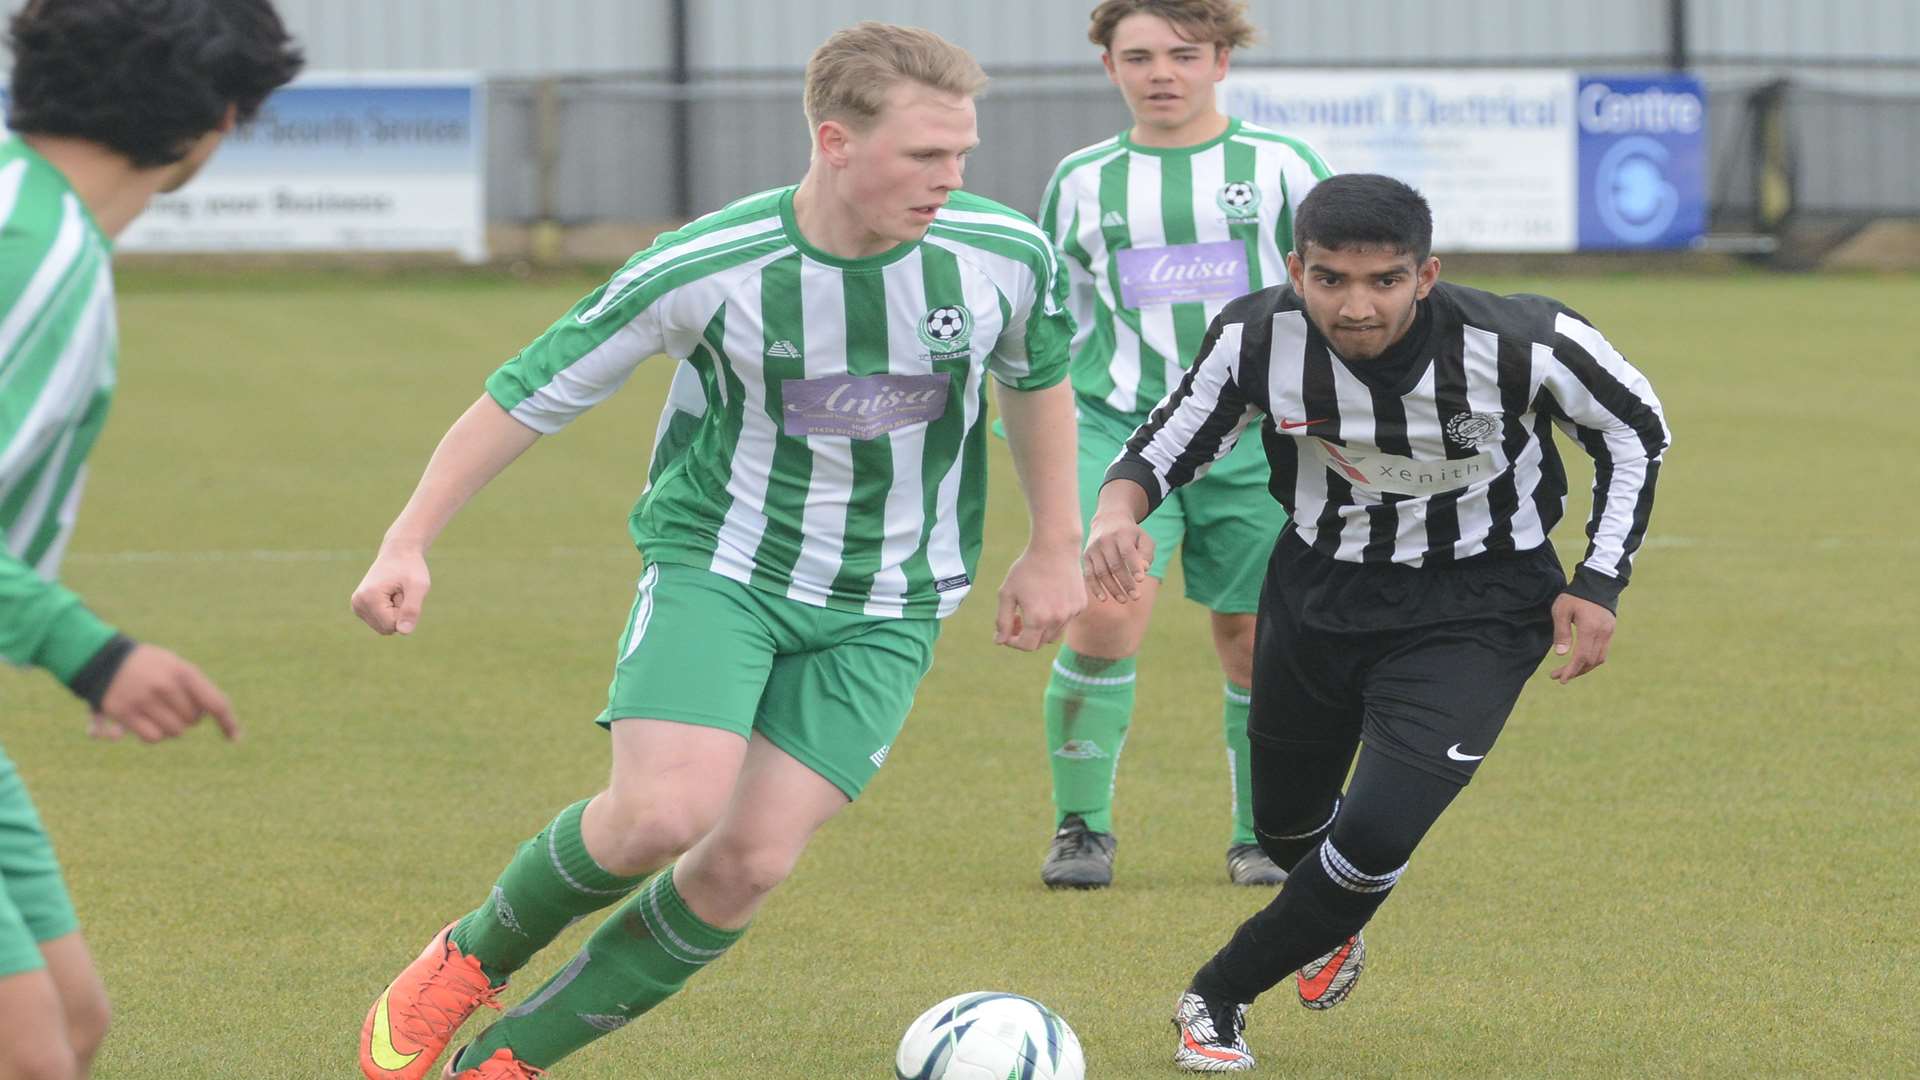 Eagles under-16s, in green, dictating play against Real 60 in the John Leeds League Cup final Picture: Gary Browne